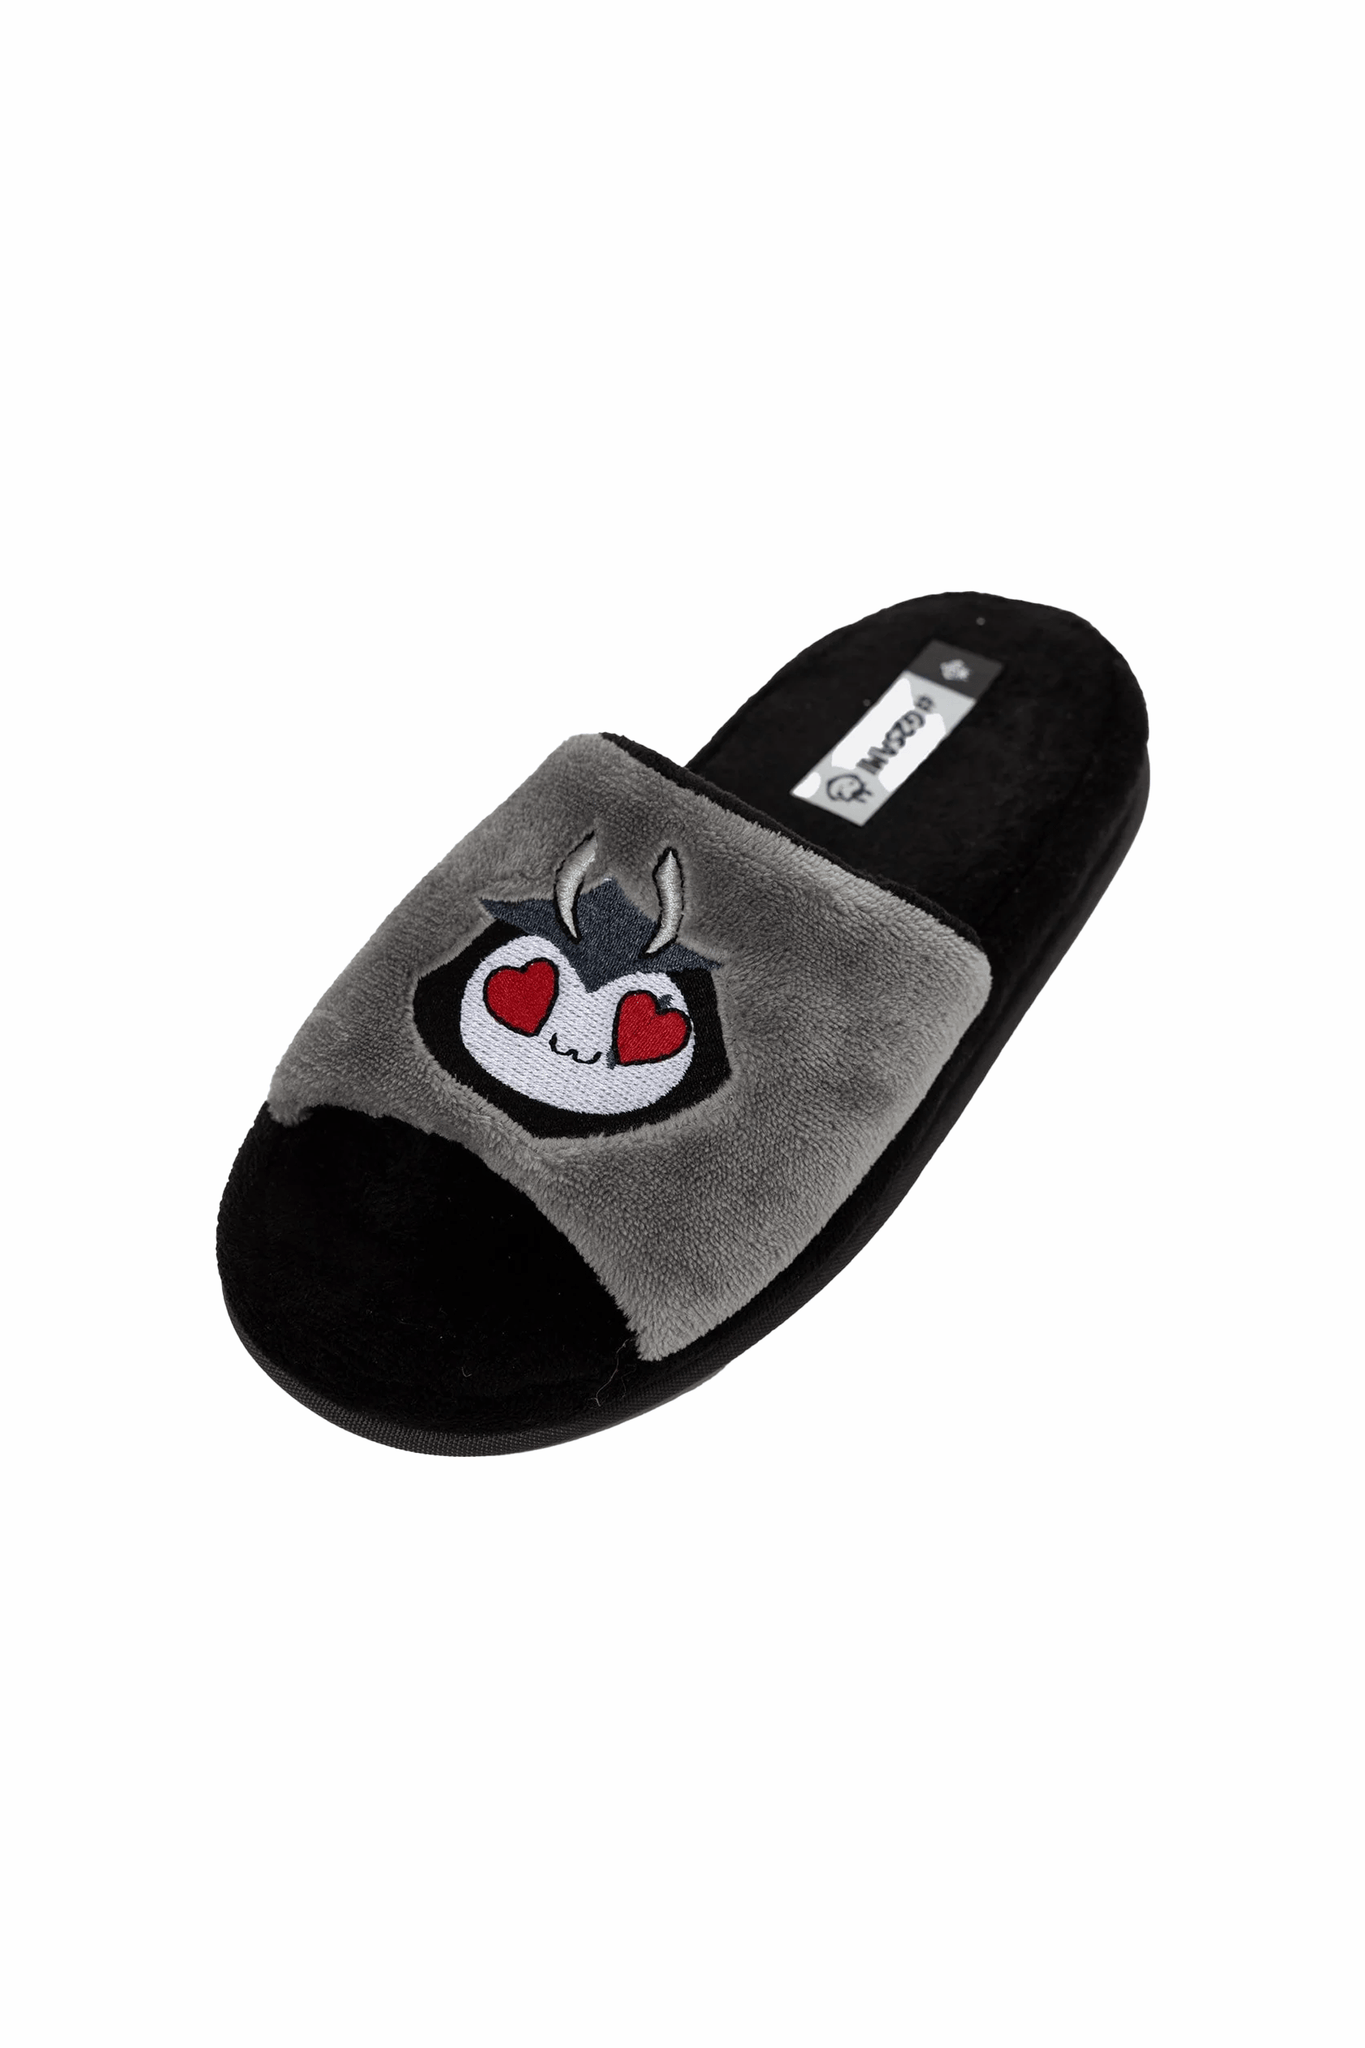 G2 Sami plush slippers, cozy and cute footwear featuring the G2 Esports mascot.